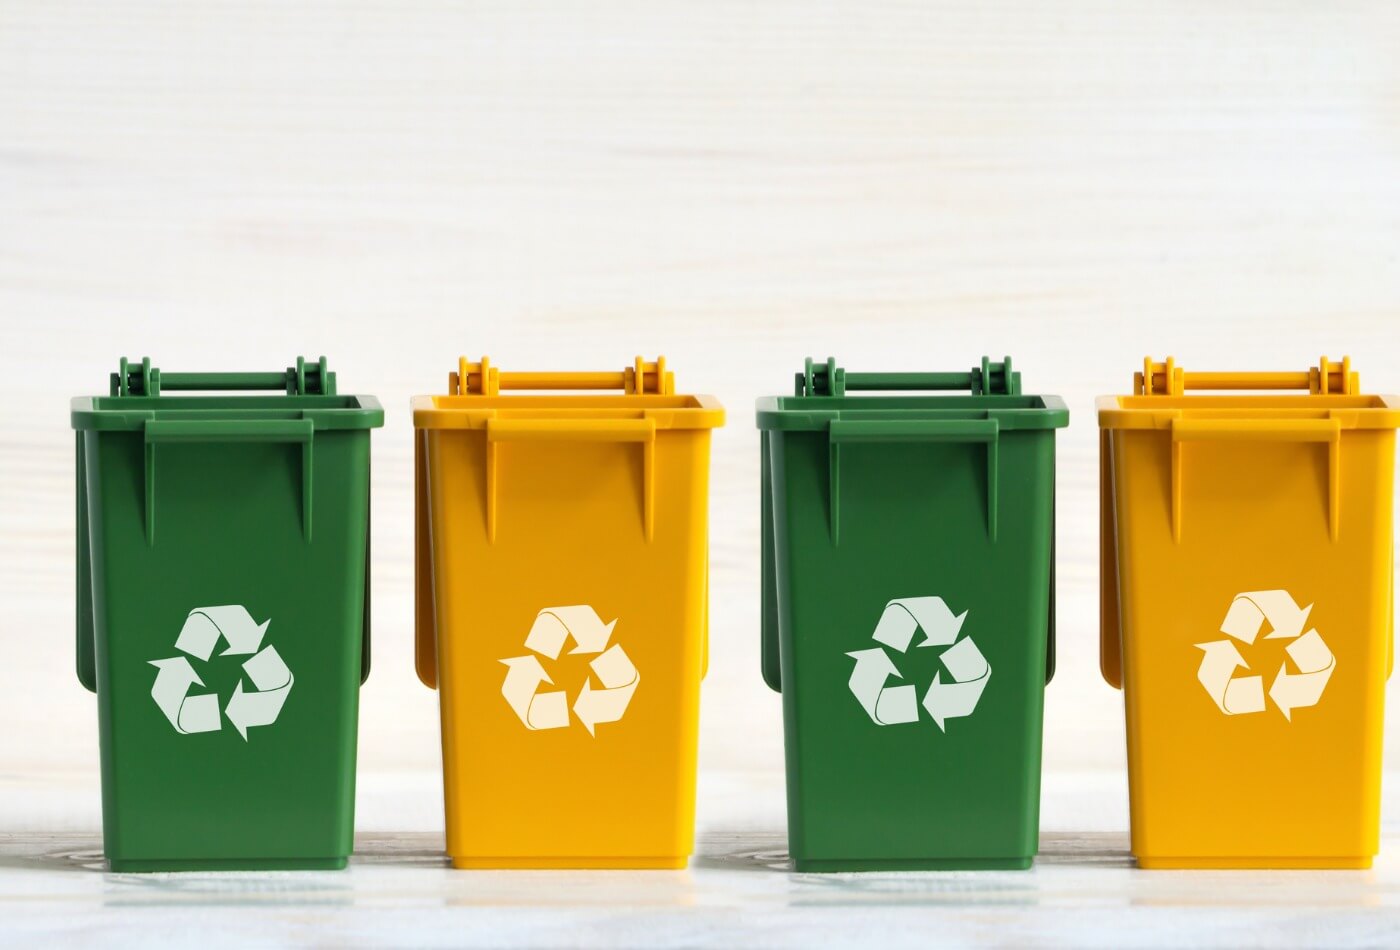 four-plastic-dumpsters-yellow-and-green-with-open-lids-the-ecology-picture-id1306315907 (1)